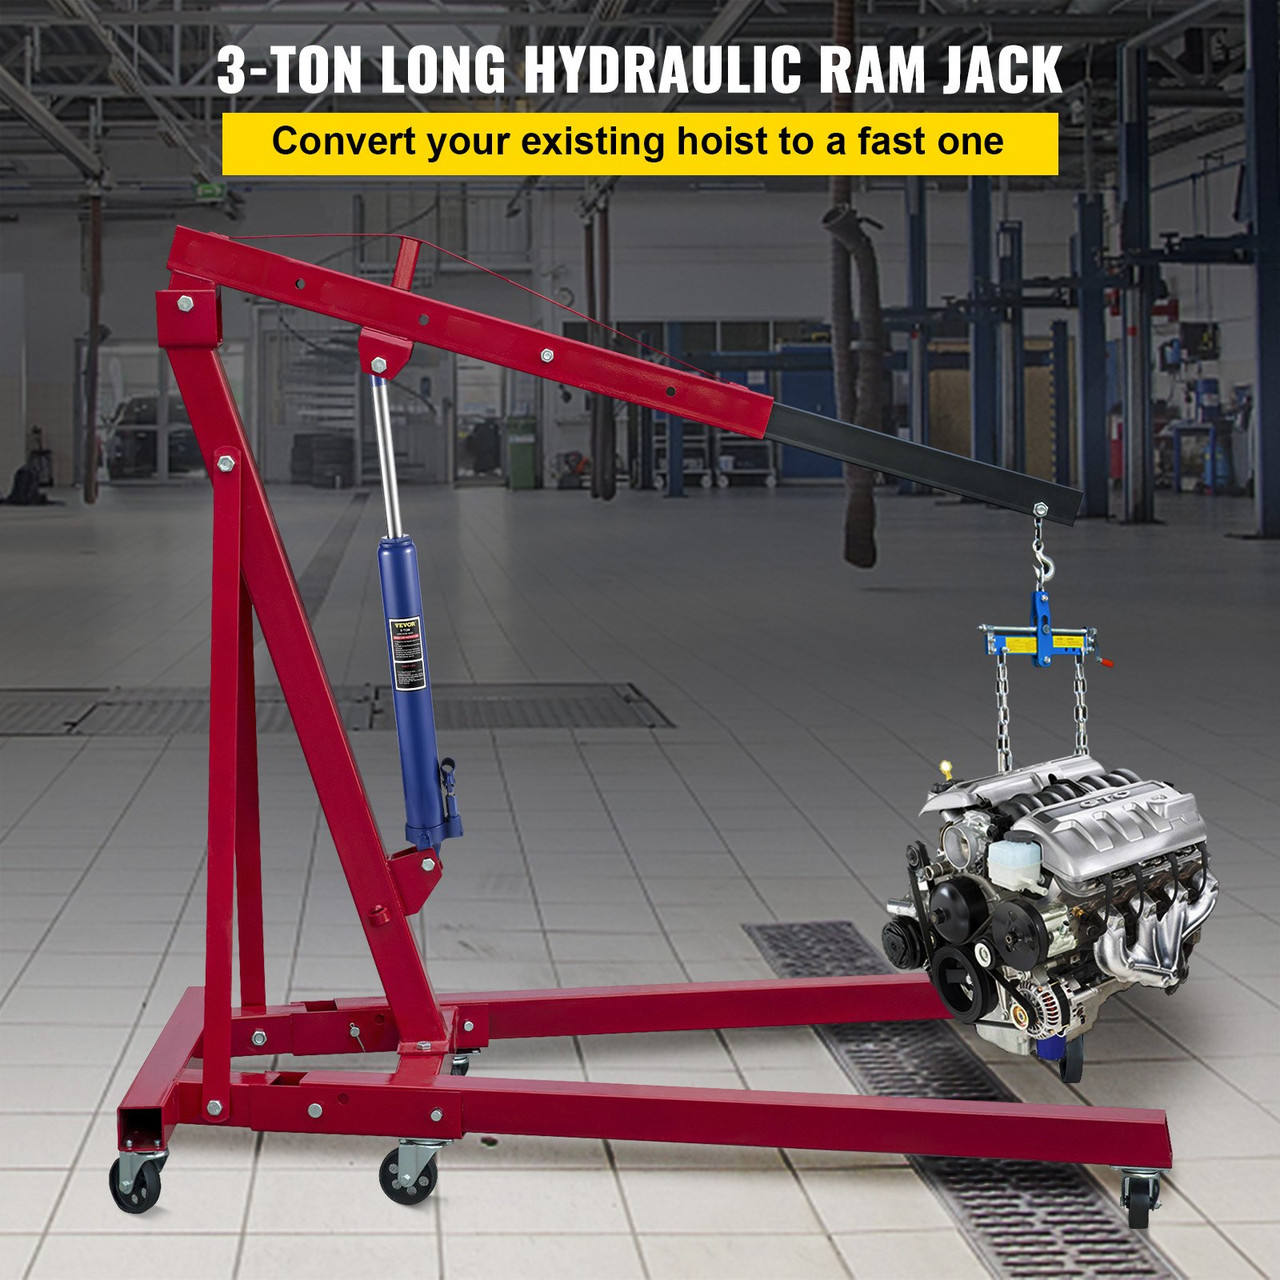 Hydraulic Long Ram Jack, 3 Tons/6600 lbs Capacity, with Single Piston Pump and Clevis Base, Manual Cherry Picker w/Handle, for Garage/Shop Cranes, Engine Lift Hoist, Blue